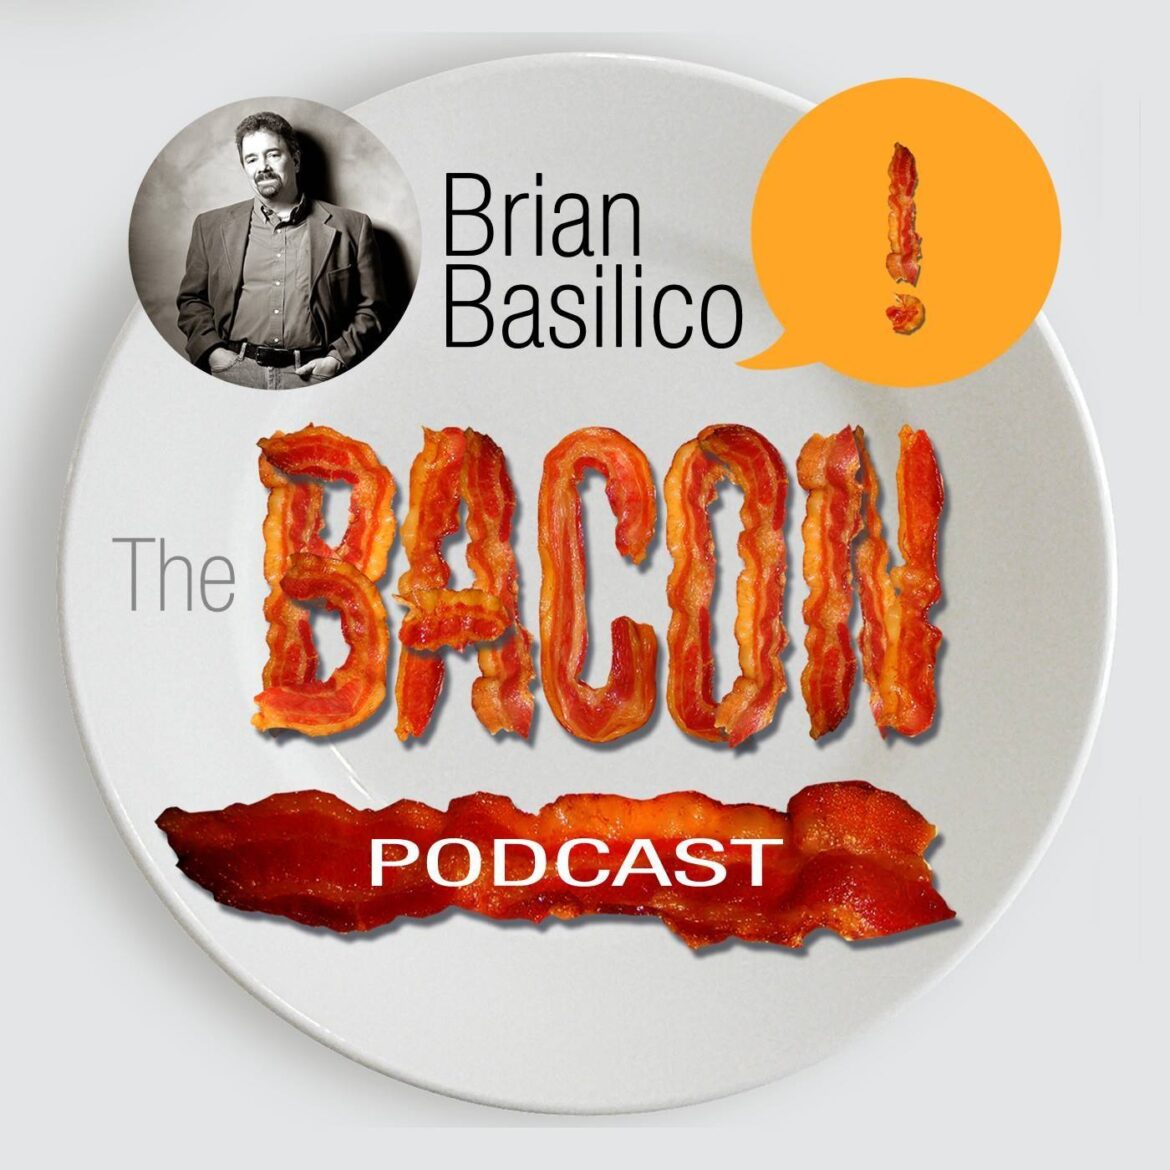 Jeff Ward returns to the Bacon Podcast!